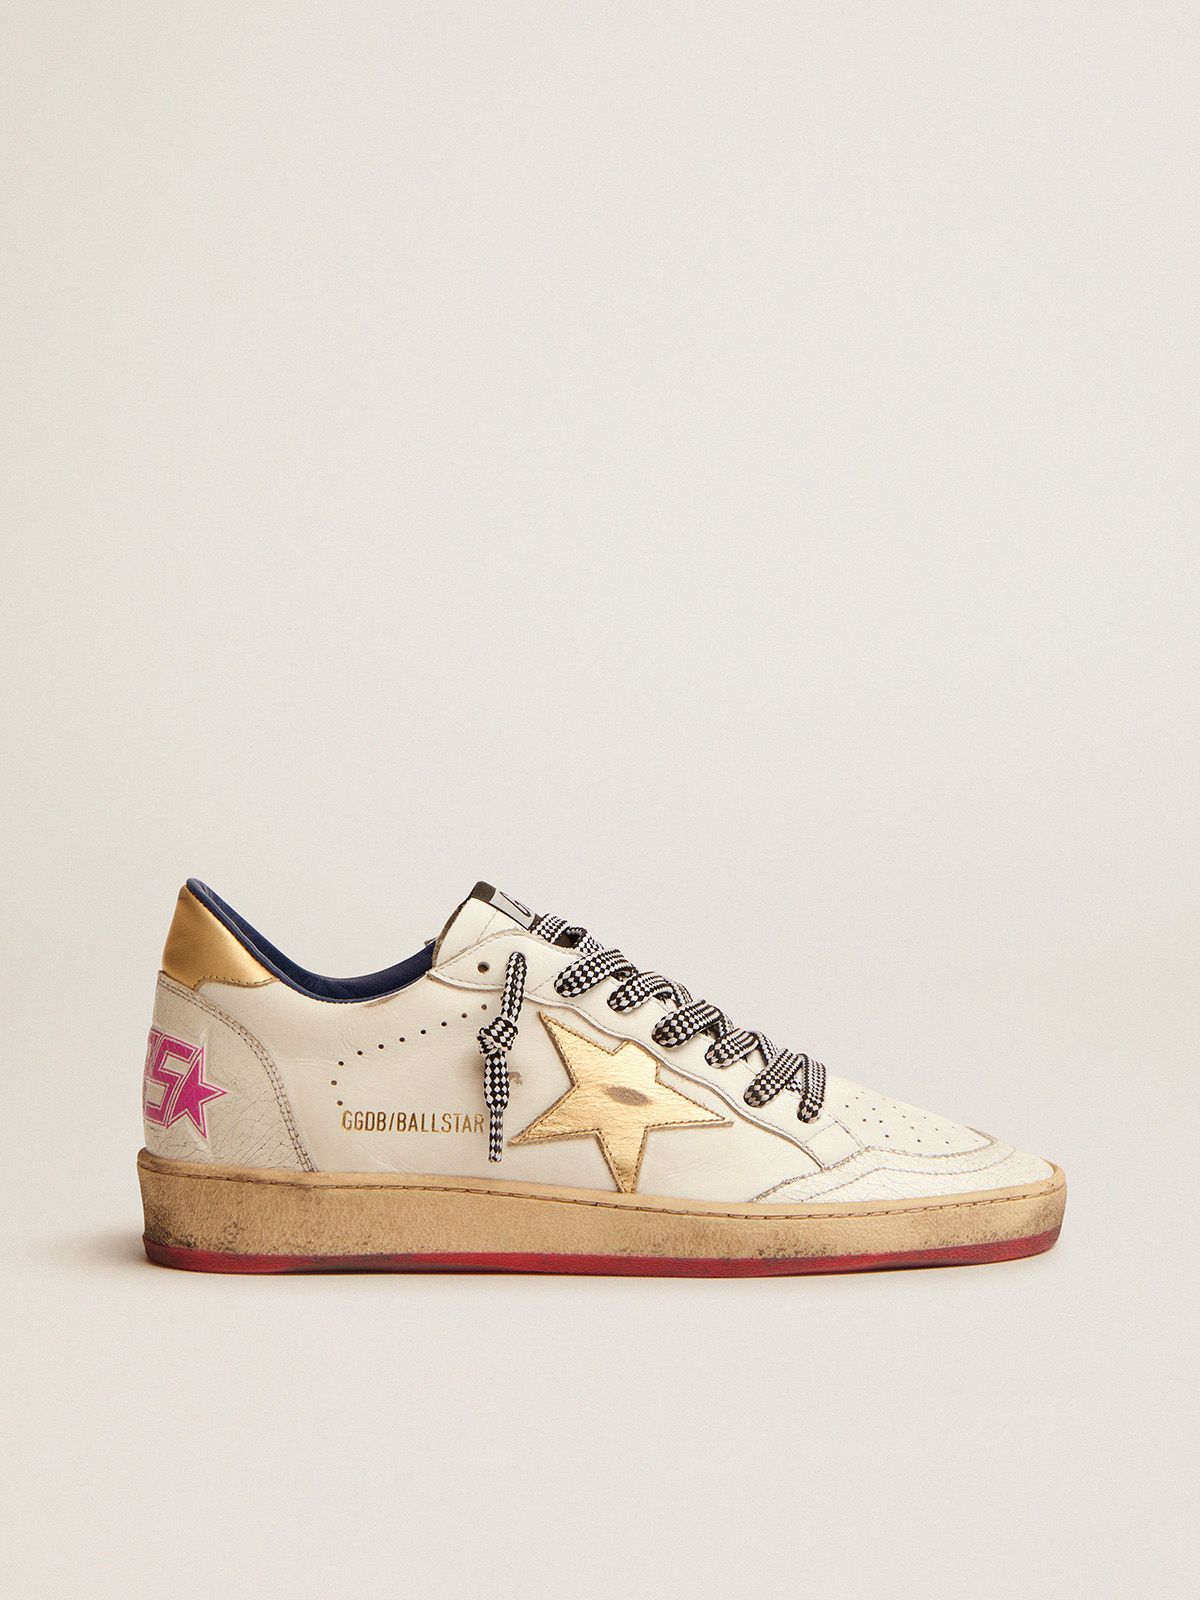 Golden Goose Sneakers Donna Ball Star LTD sneakers in white leather with gold laminated leather inserts